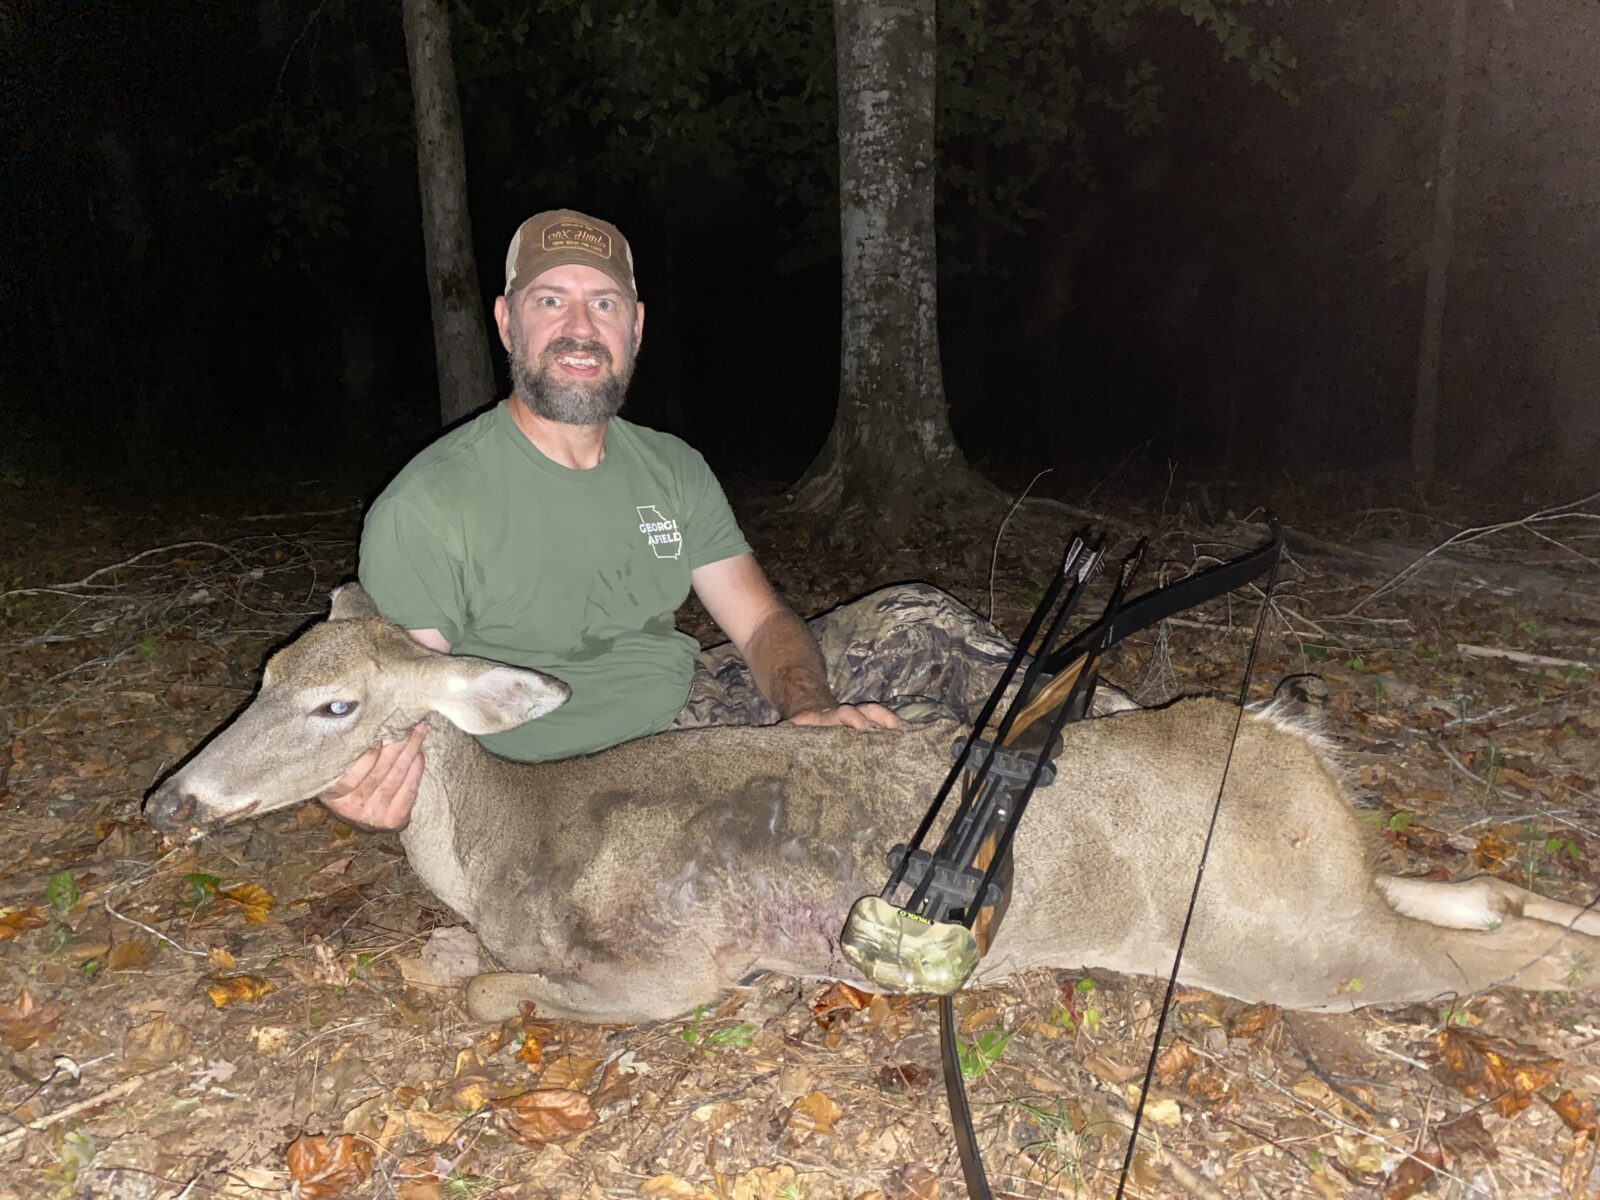 Hunter with recurve bow and a downed deer